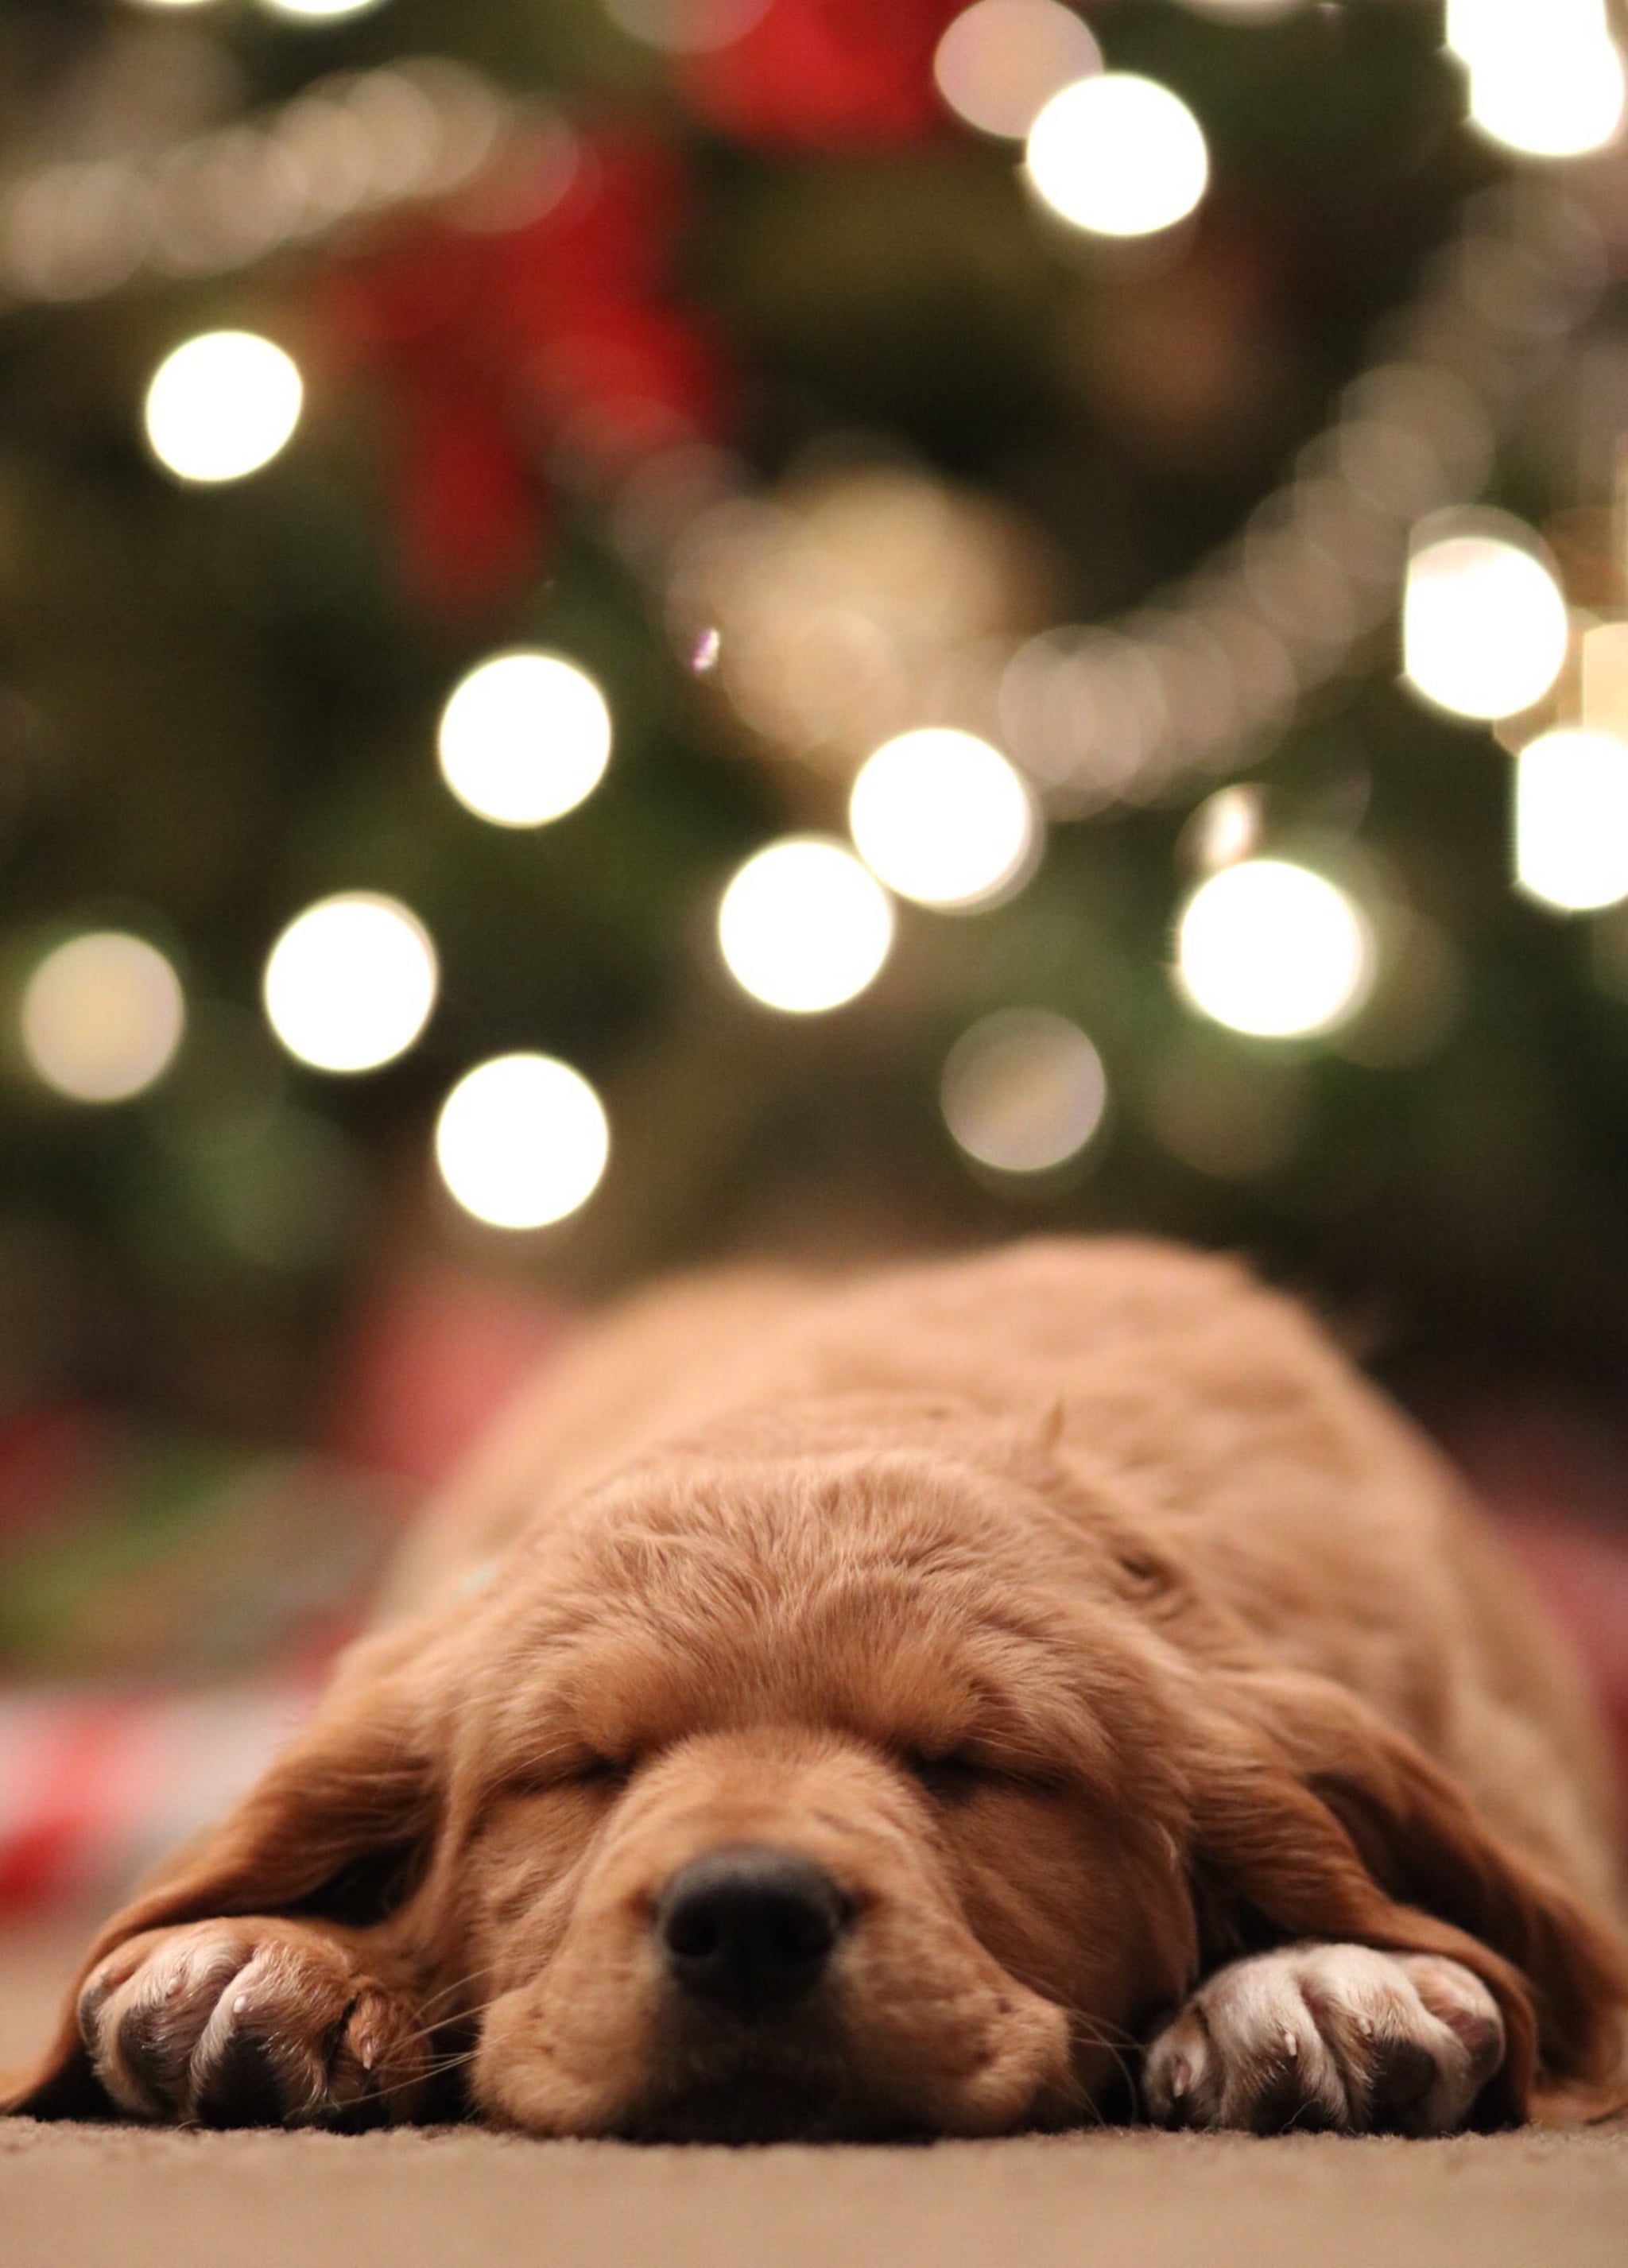 Christmas Puppy iPhone Wallpaper Christmas Wallpaper That'll Make Your Home Screen Aesthetically Pleasing This Holiday